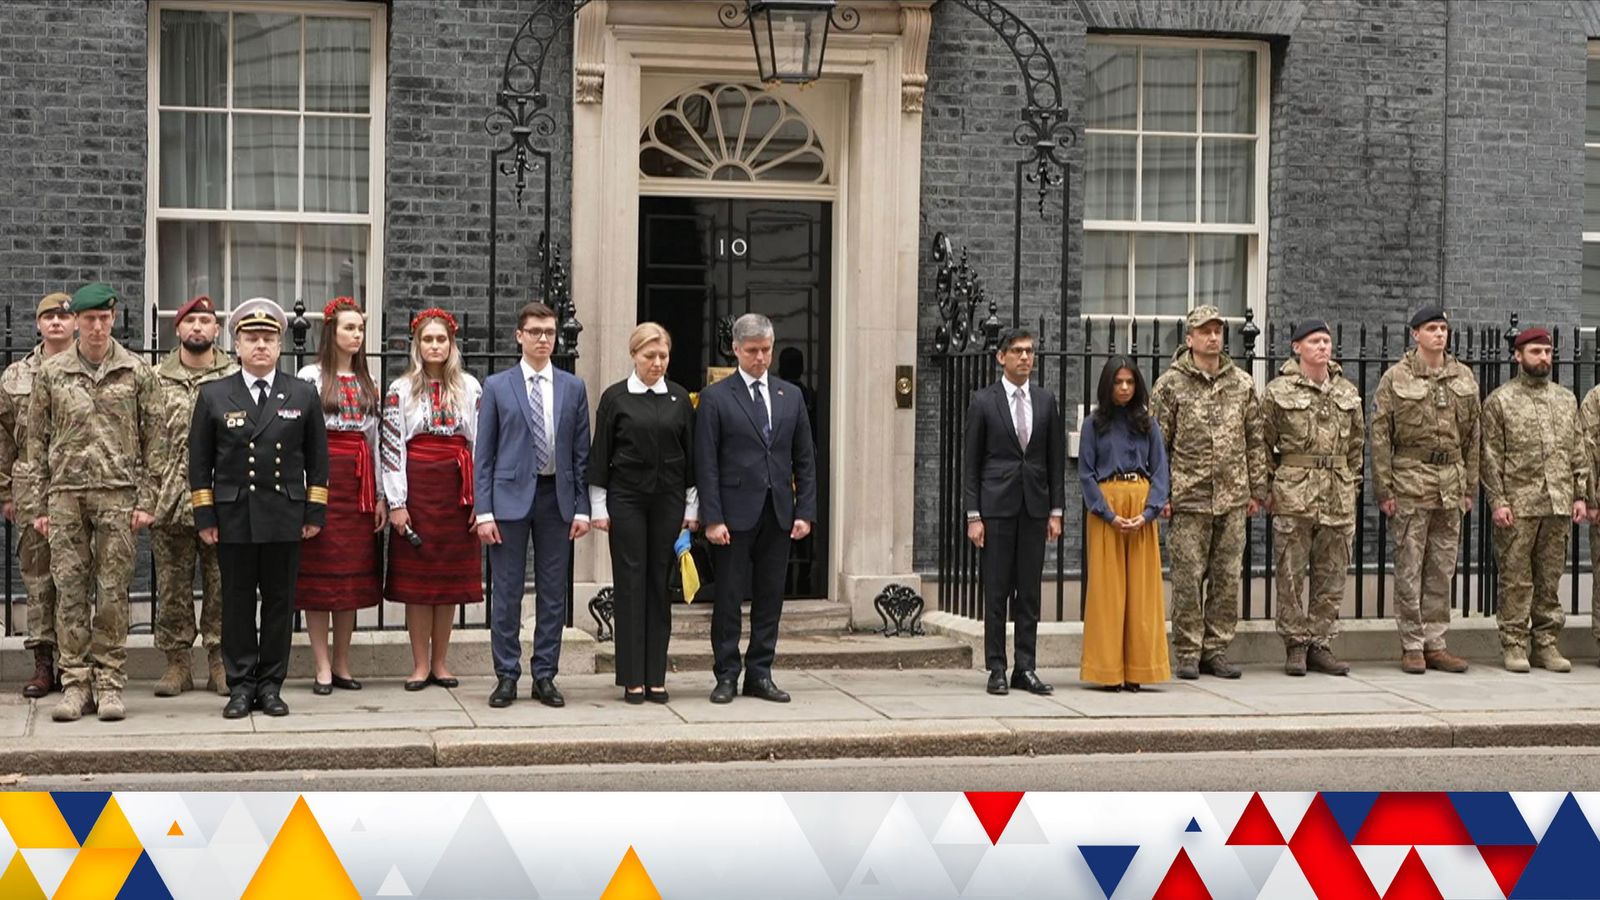 'They have fought heroically': Rishi Sunak leads minute's silence as UK shows solidarity with Ukraine on war anniversary